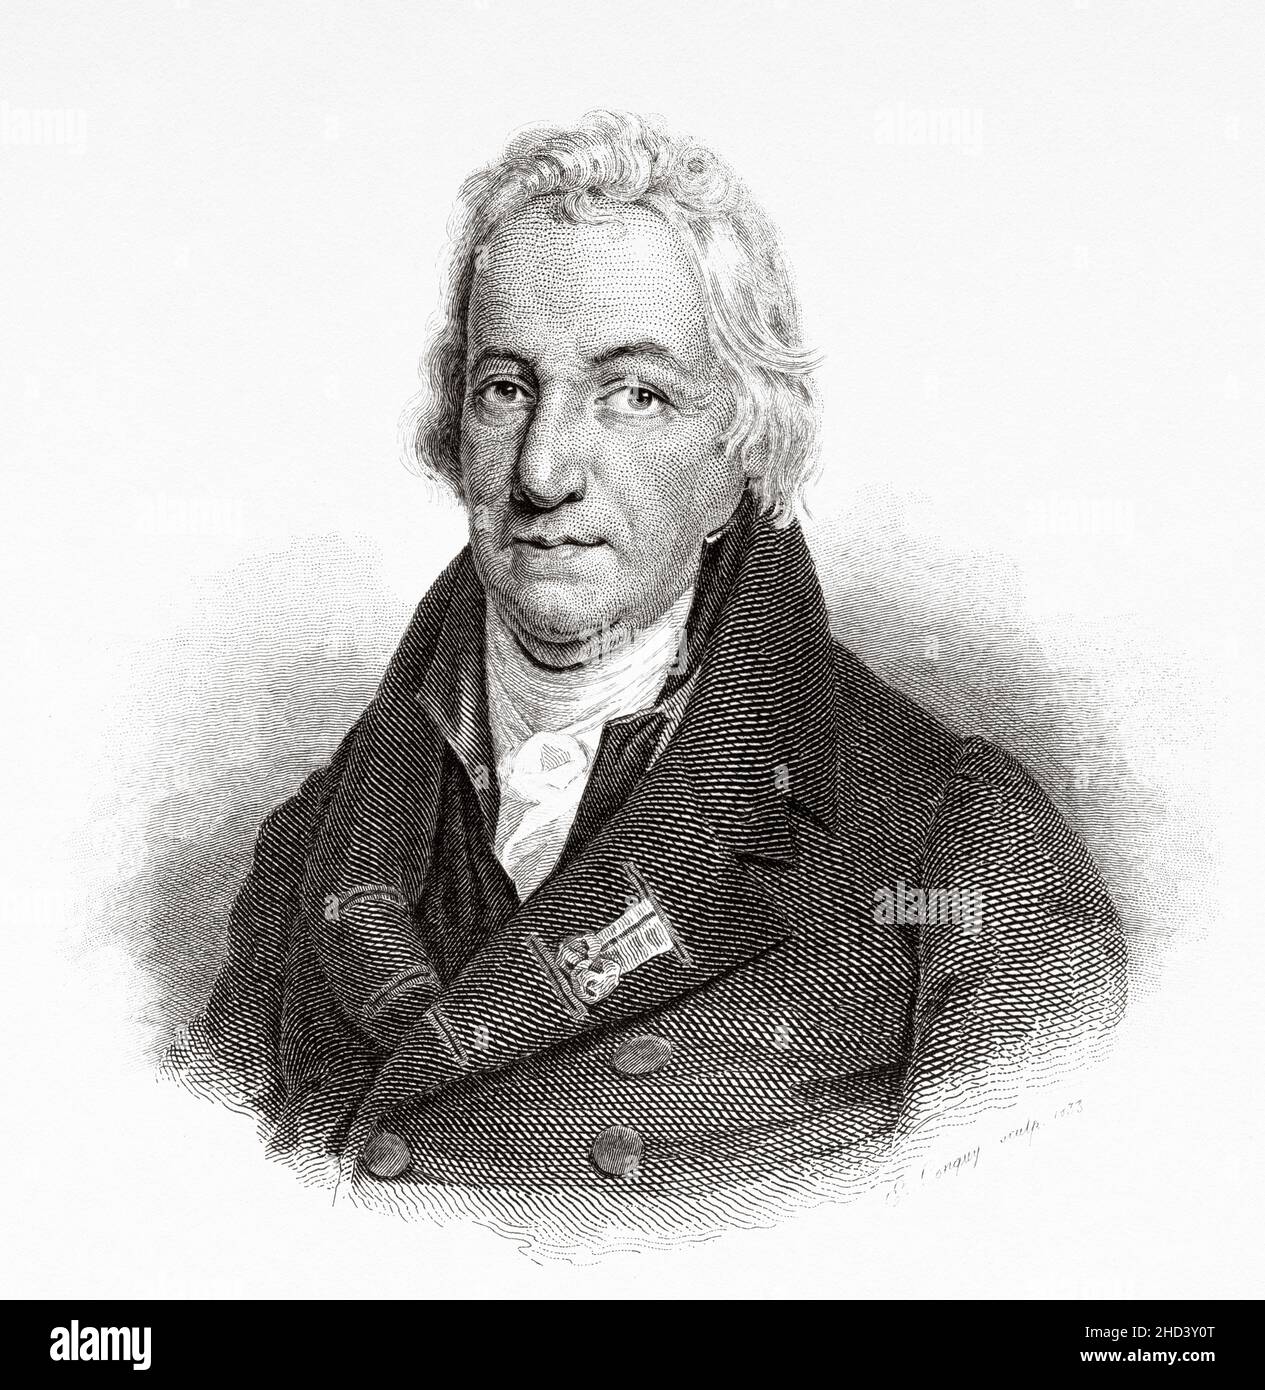 Claude Louis Berthollet (1748-1822) was a Savoyard-French chemist who became vice president of the French Senate in 1804, was the first to demonstrate the bleaching action of chlorine gas and develop a solution of sodium hypochlorite as a modern bleaching agent. France. Europe. Old 19th century engraved illustration from Portraits et histoire des hommes utile by Societe Montyon et Franklin 1837 Stock Photo